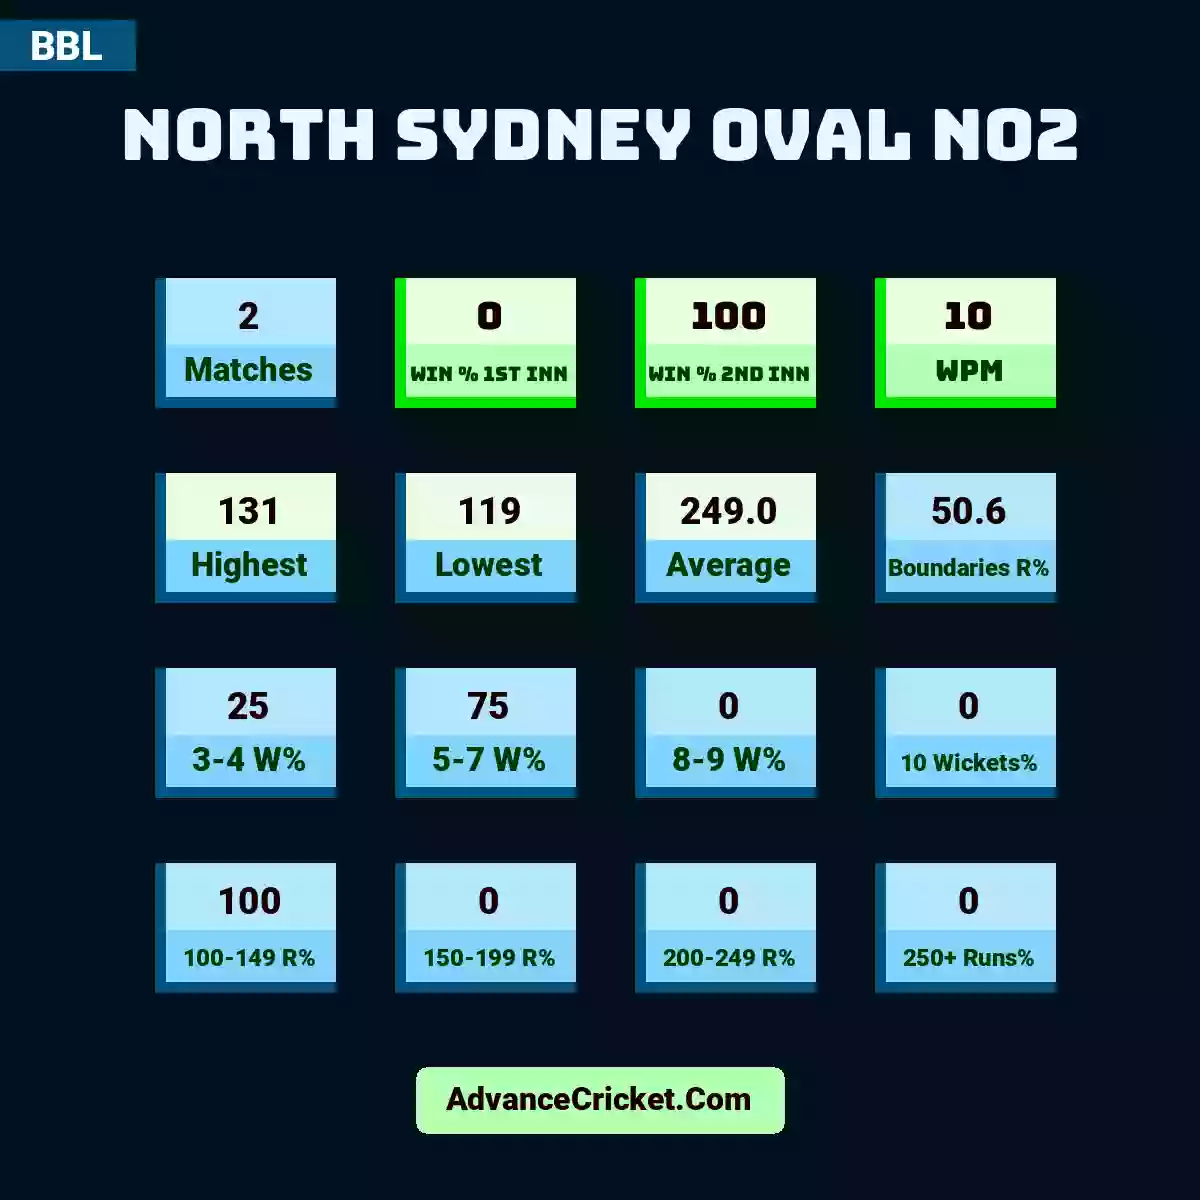 Image showing North Sydney Oval No2 with Matches: 2, Win % 1st Inn: 0, Win % 2nd Inn: 100, WPM: 10, Highest: 131, Lowest: 119, Average: 249.0, Boundaries R%: 50.6, 3-4 W%: 25, 5-7 W%: 75, 8-9 W%: 0, 10 Wickets%: 0, 100-149 R%: 100, 150-199 R%: 0, 200-249 R%: 0, 250+ Runs%: 0.